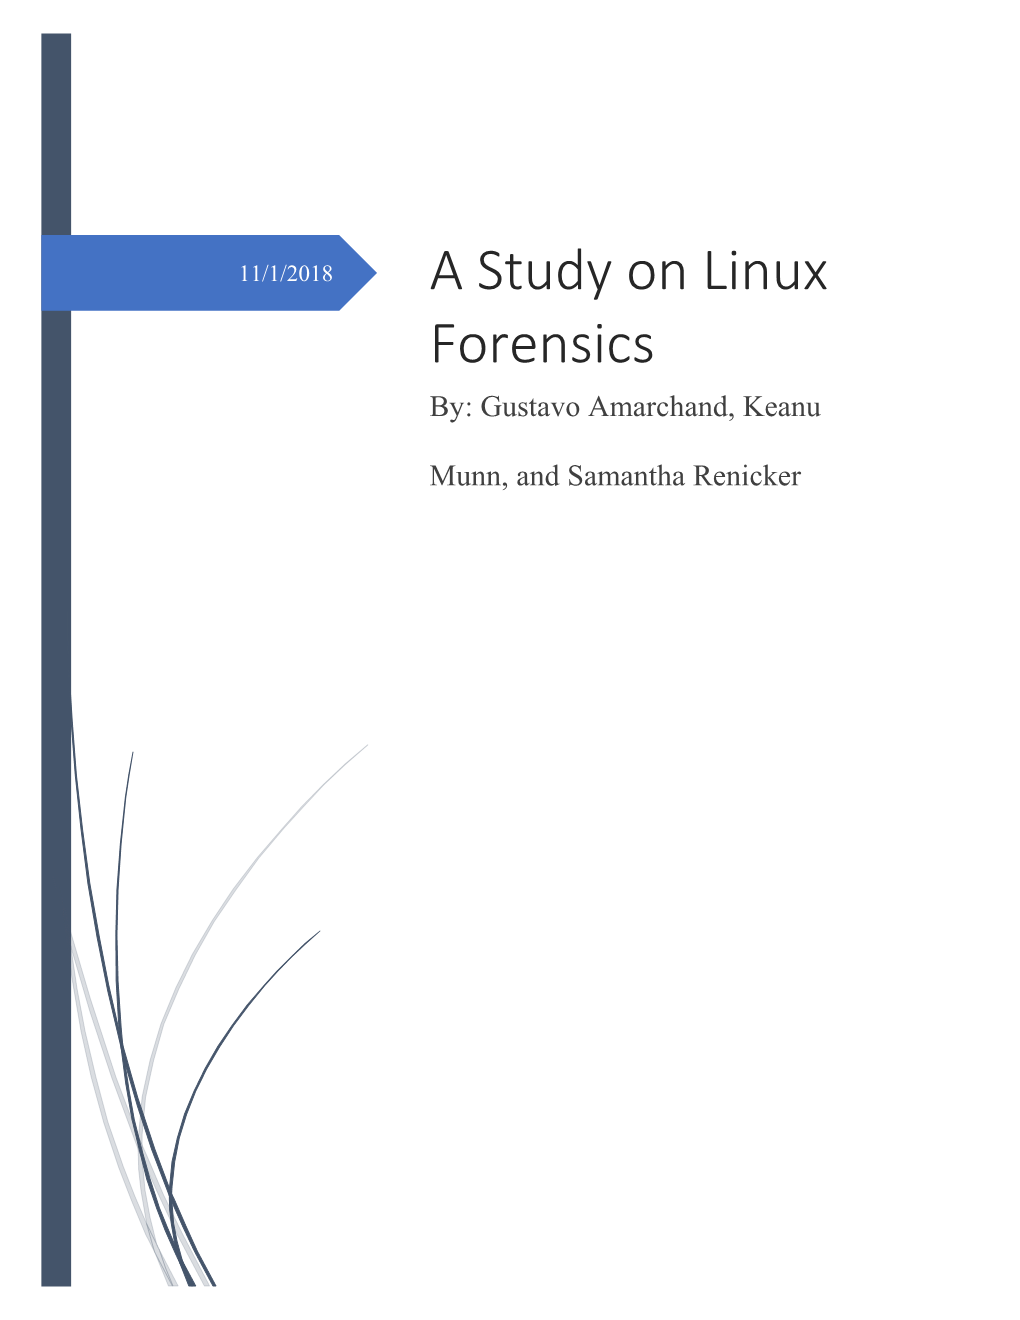 A Study on Linux Forensics By: Gustavo Amarchand, Keanu